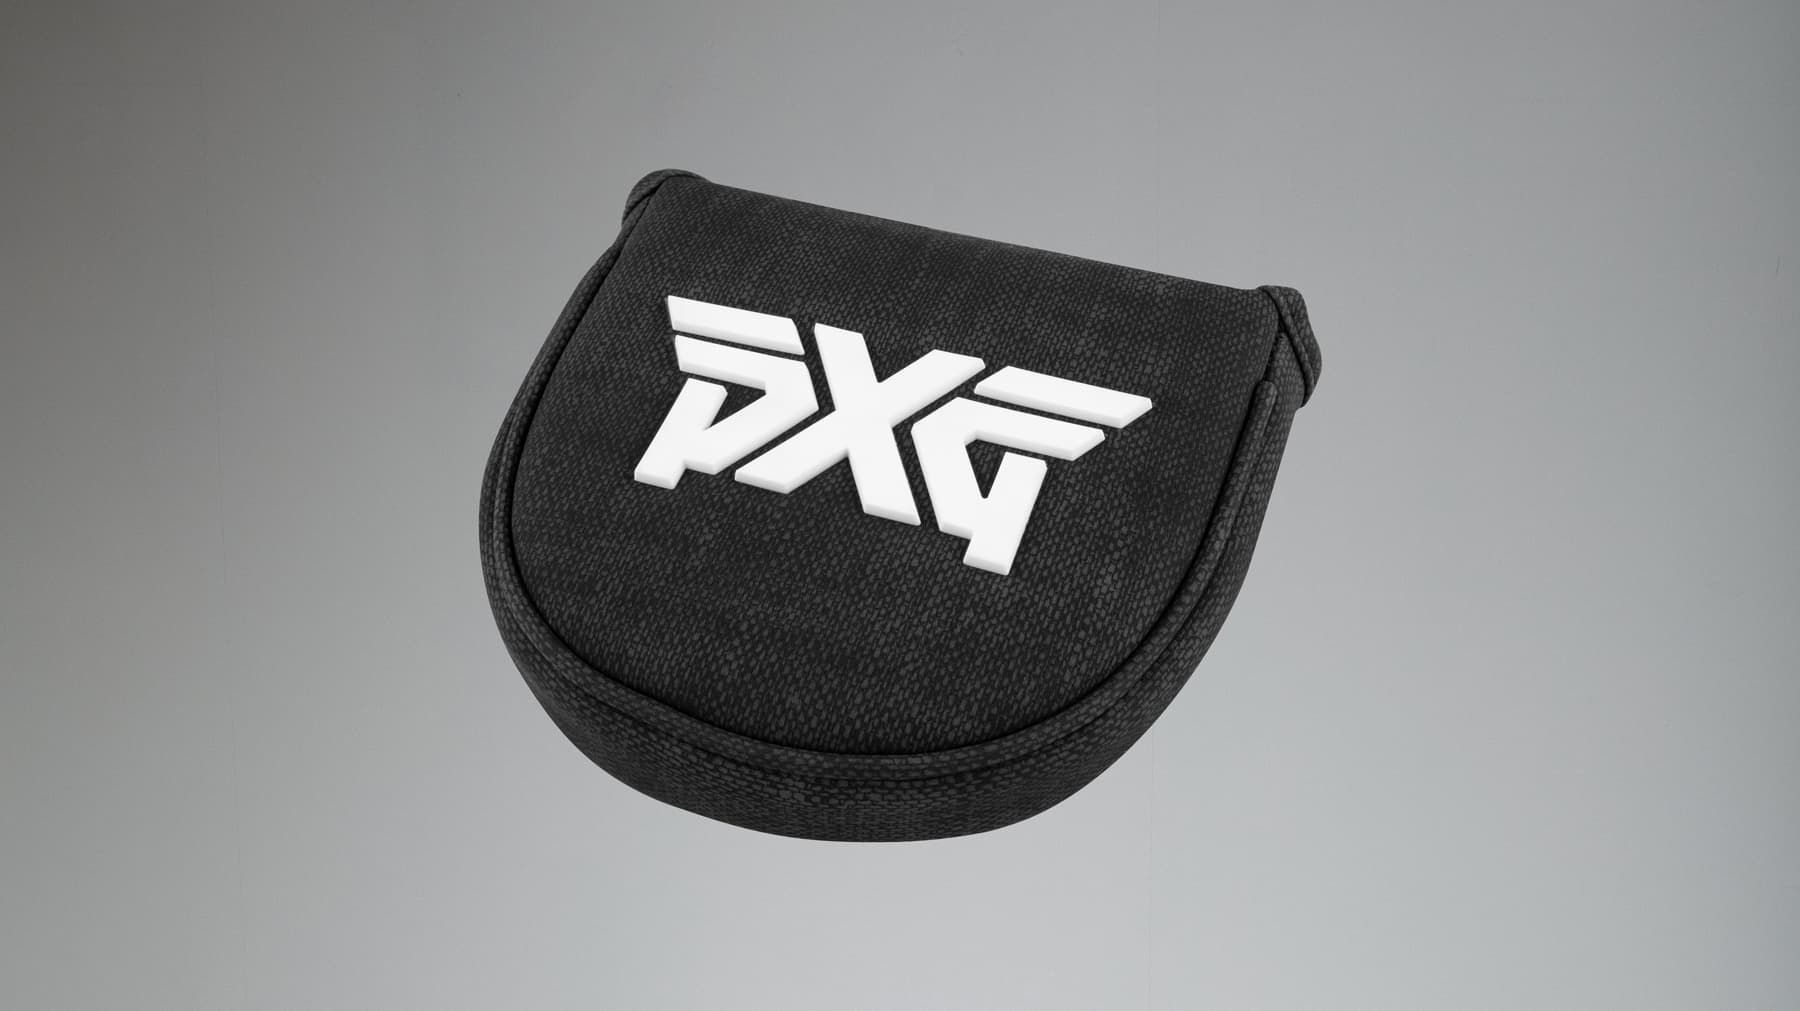 Buy PXG Iron Cover Kit